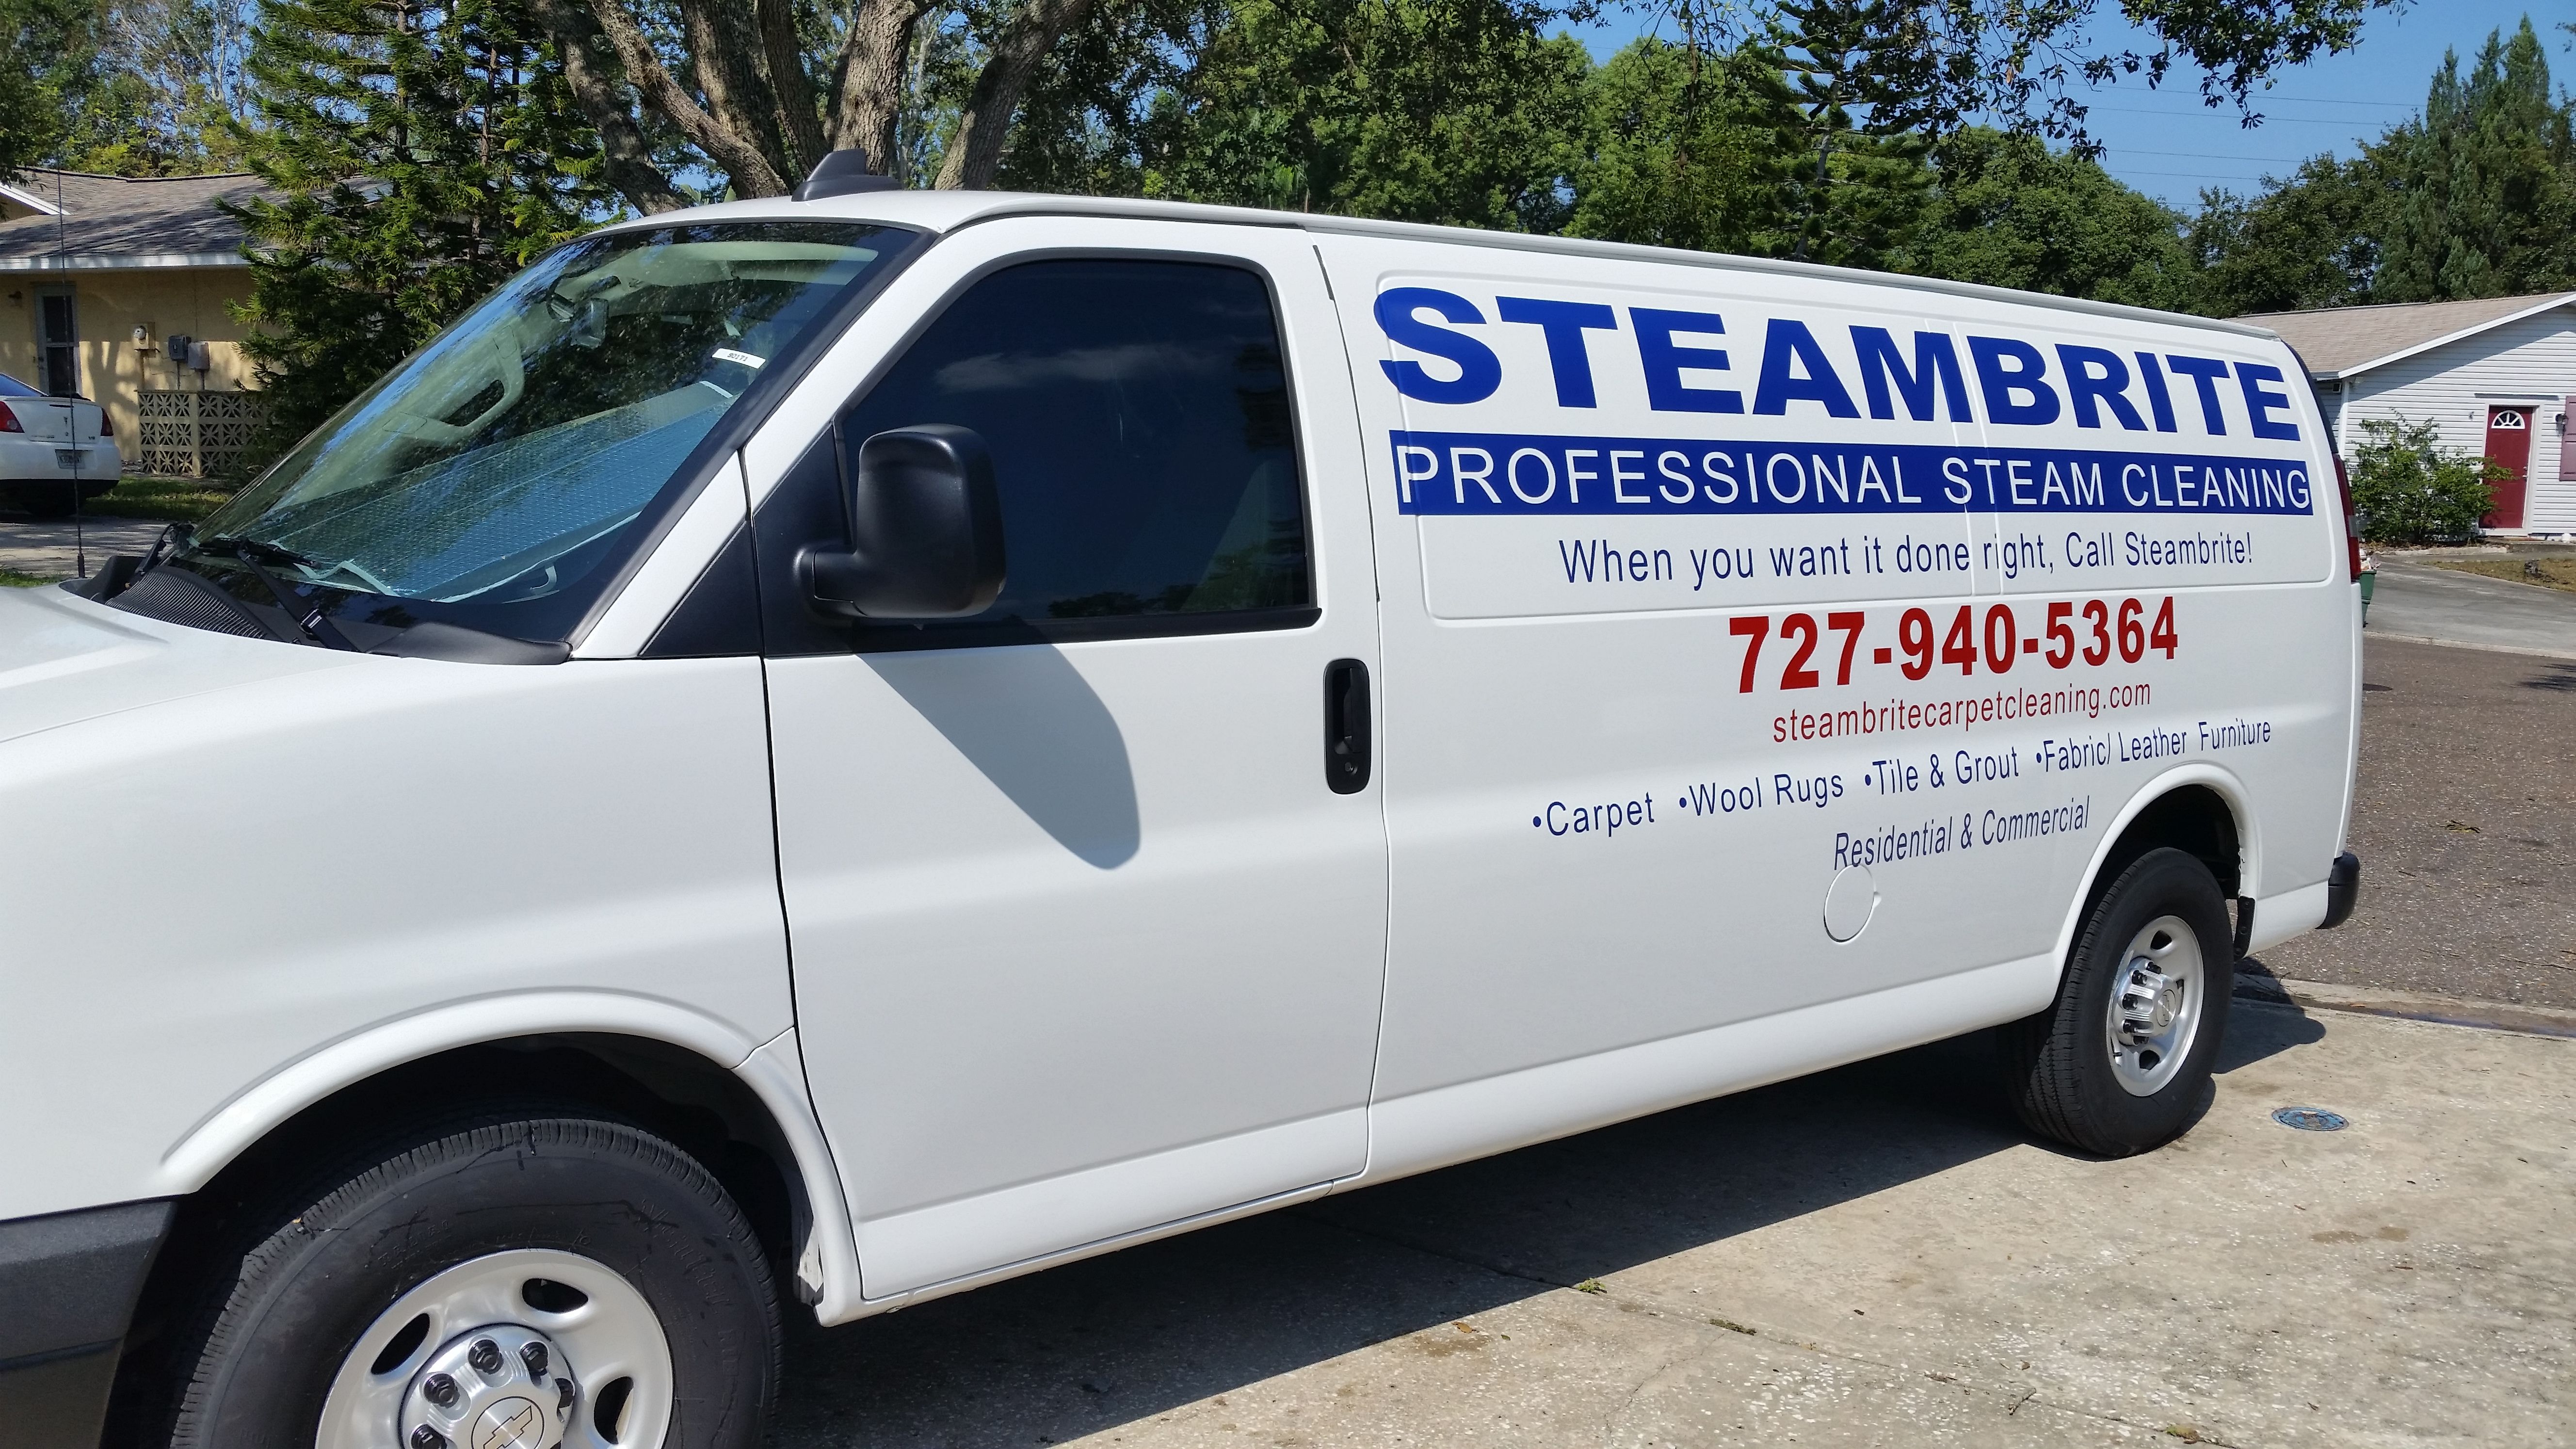 Steambrite Carpet Cleaning Services Photo